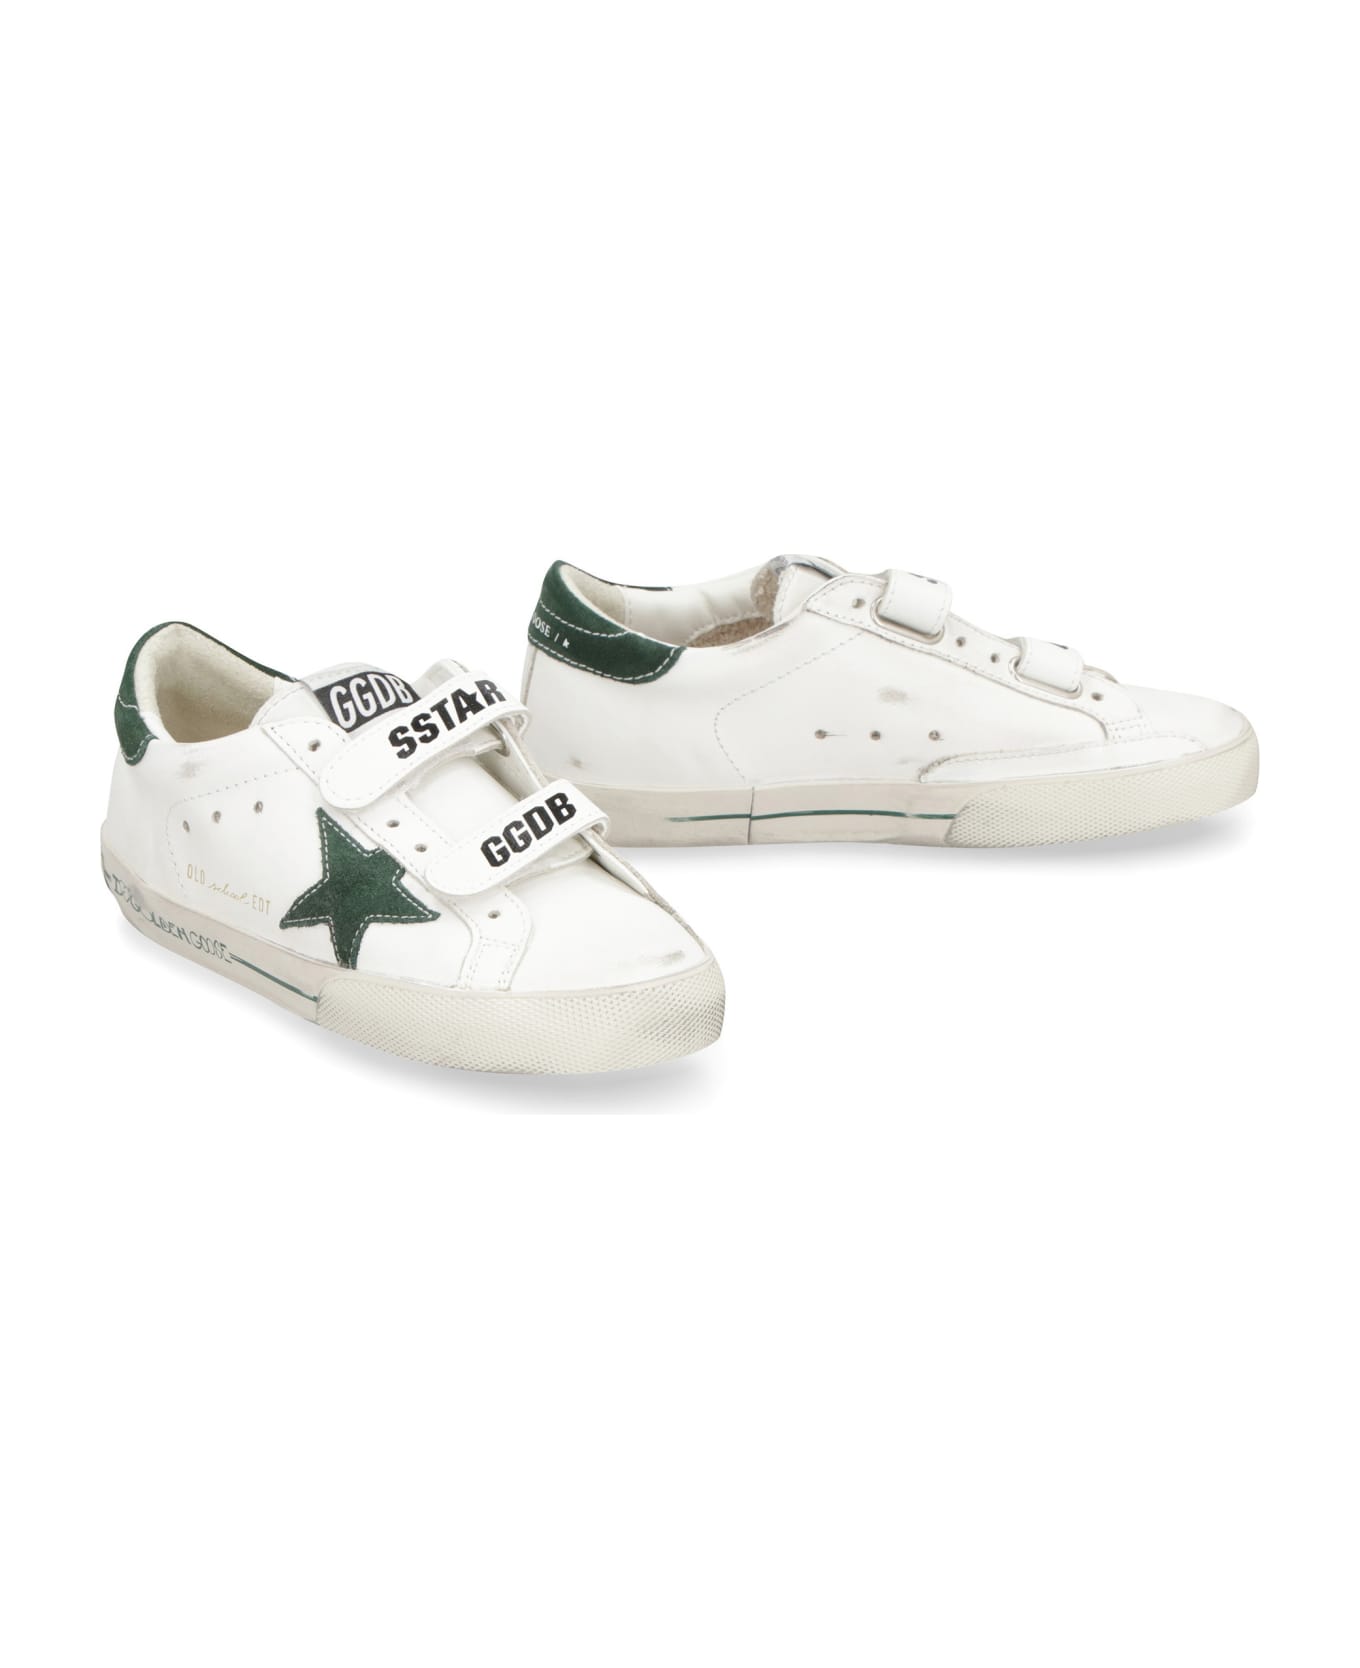 Golden Goose Old School Leather Sneakers - White